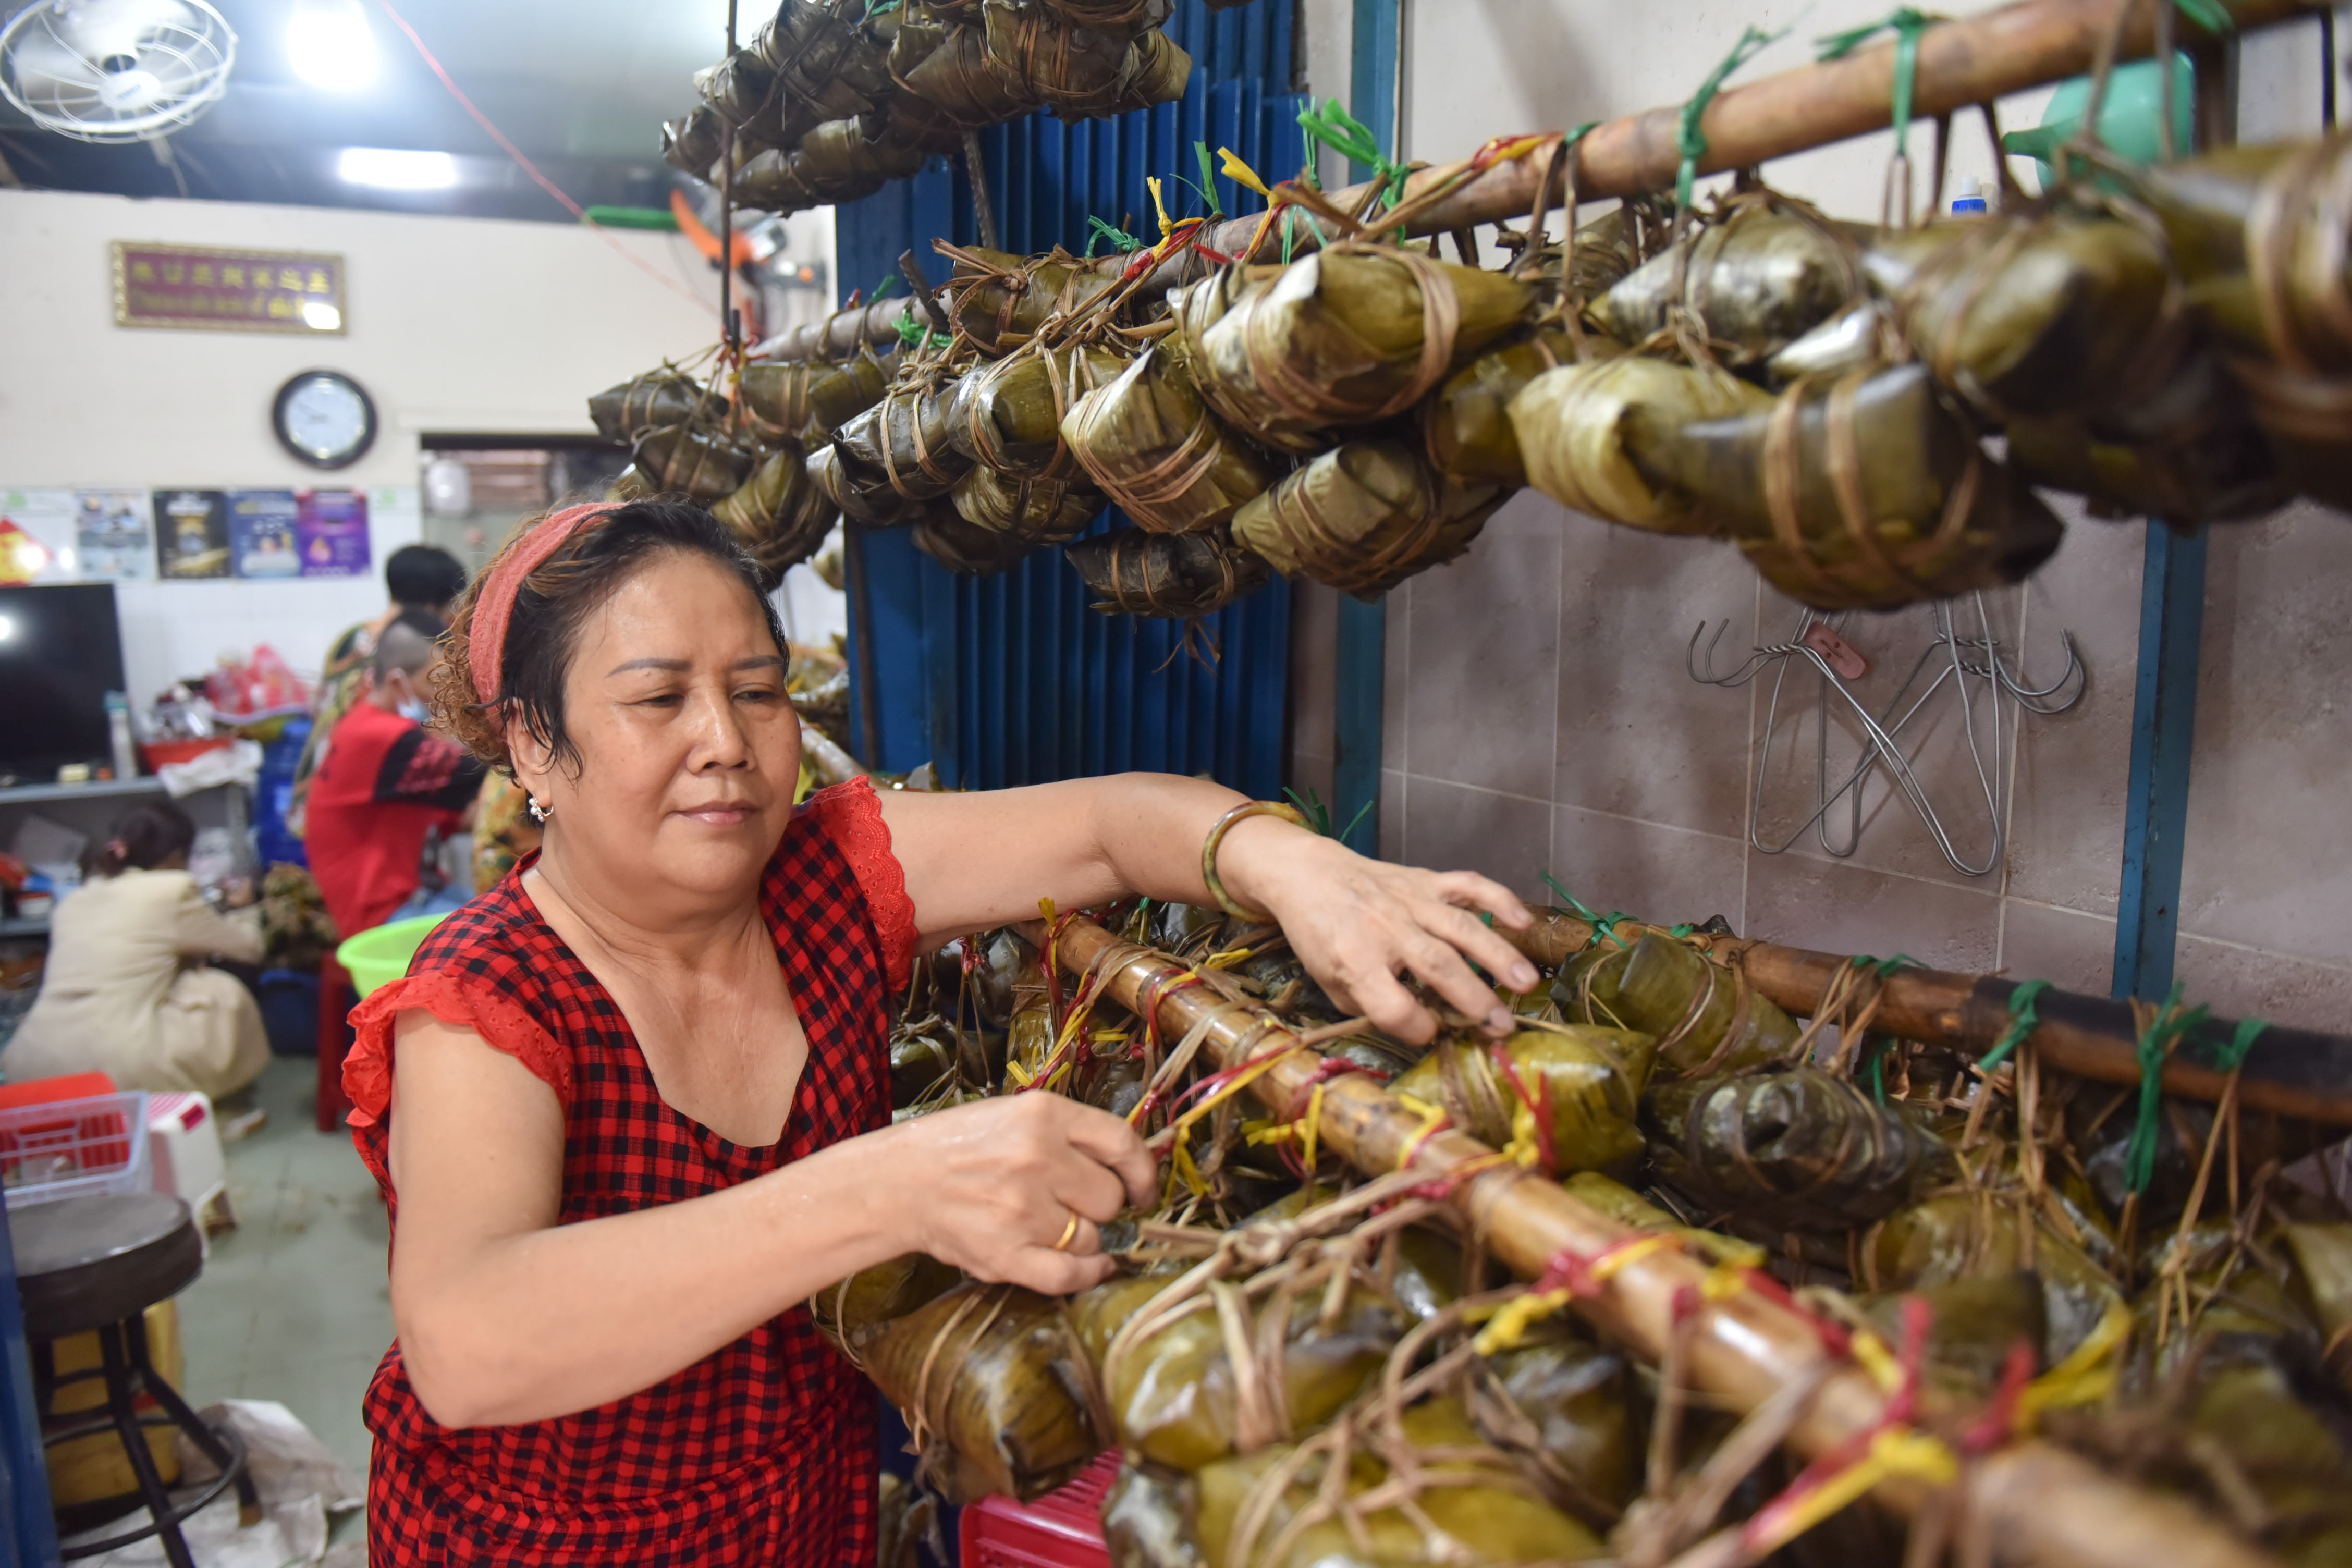 Tran Cam Thao puts finished zongzi on display at An Ky Banh Chung in District 11, Ho Chi Minh City. Photo: Ngoc Phuong / Tuoi Tre